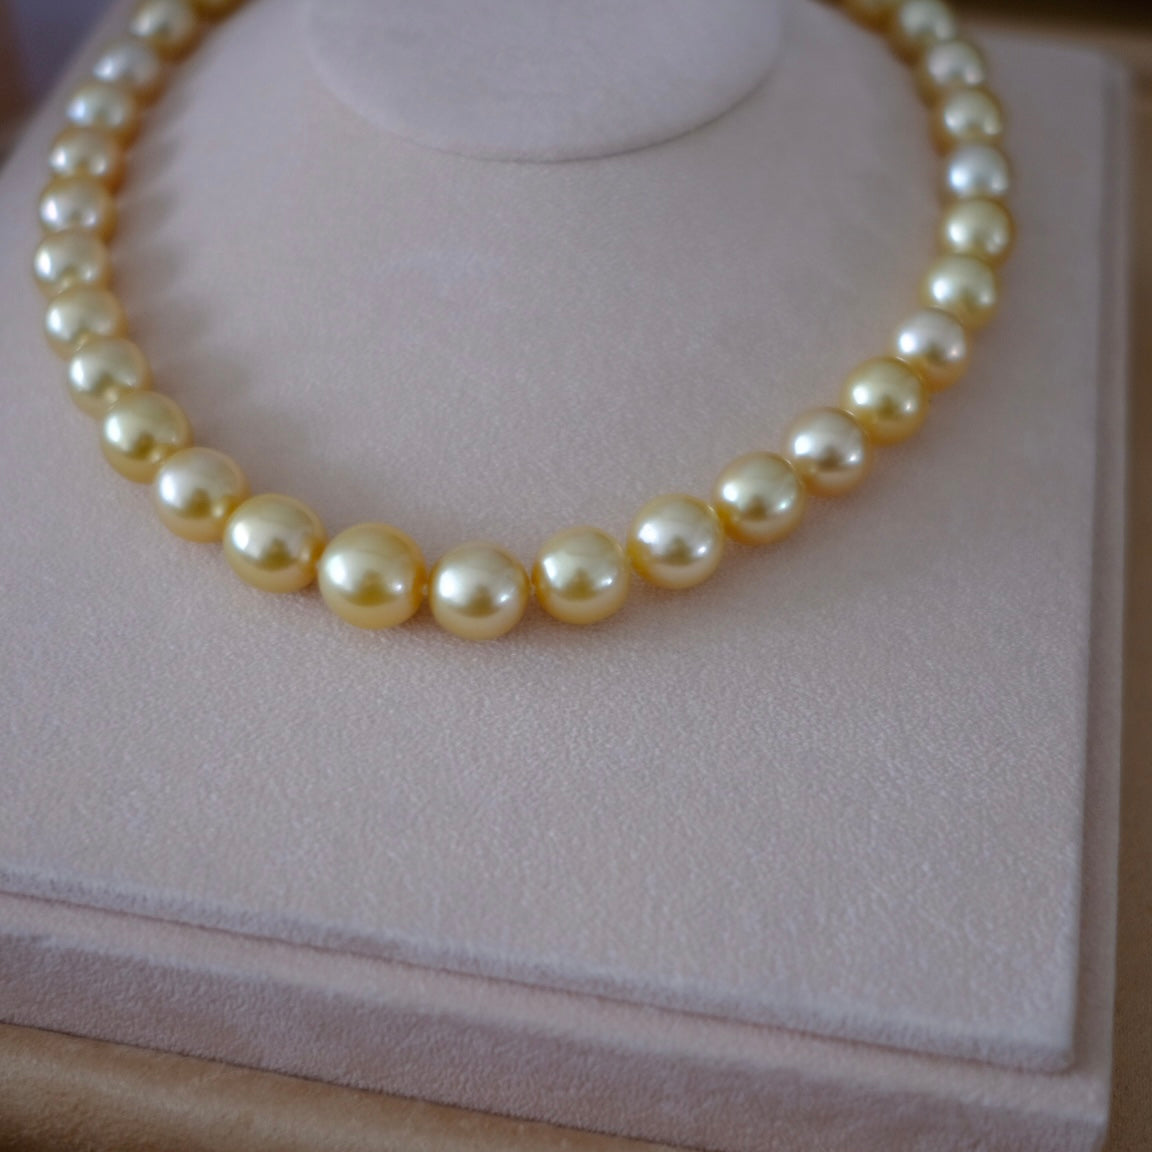 Golden South Sea Pearl Necklace, 10-12.9mm, GUILD Certificate